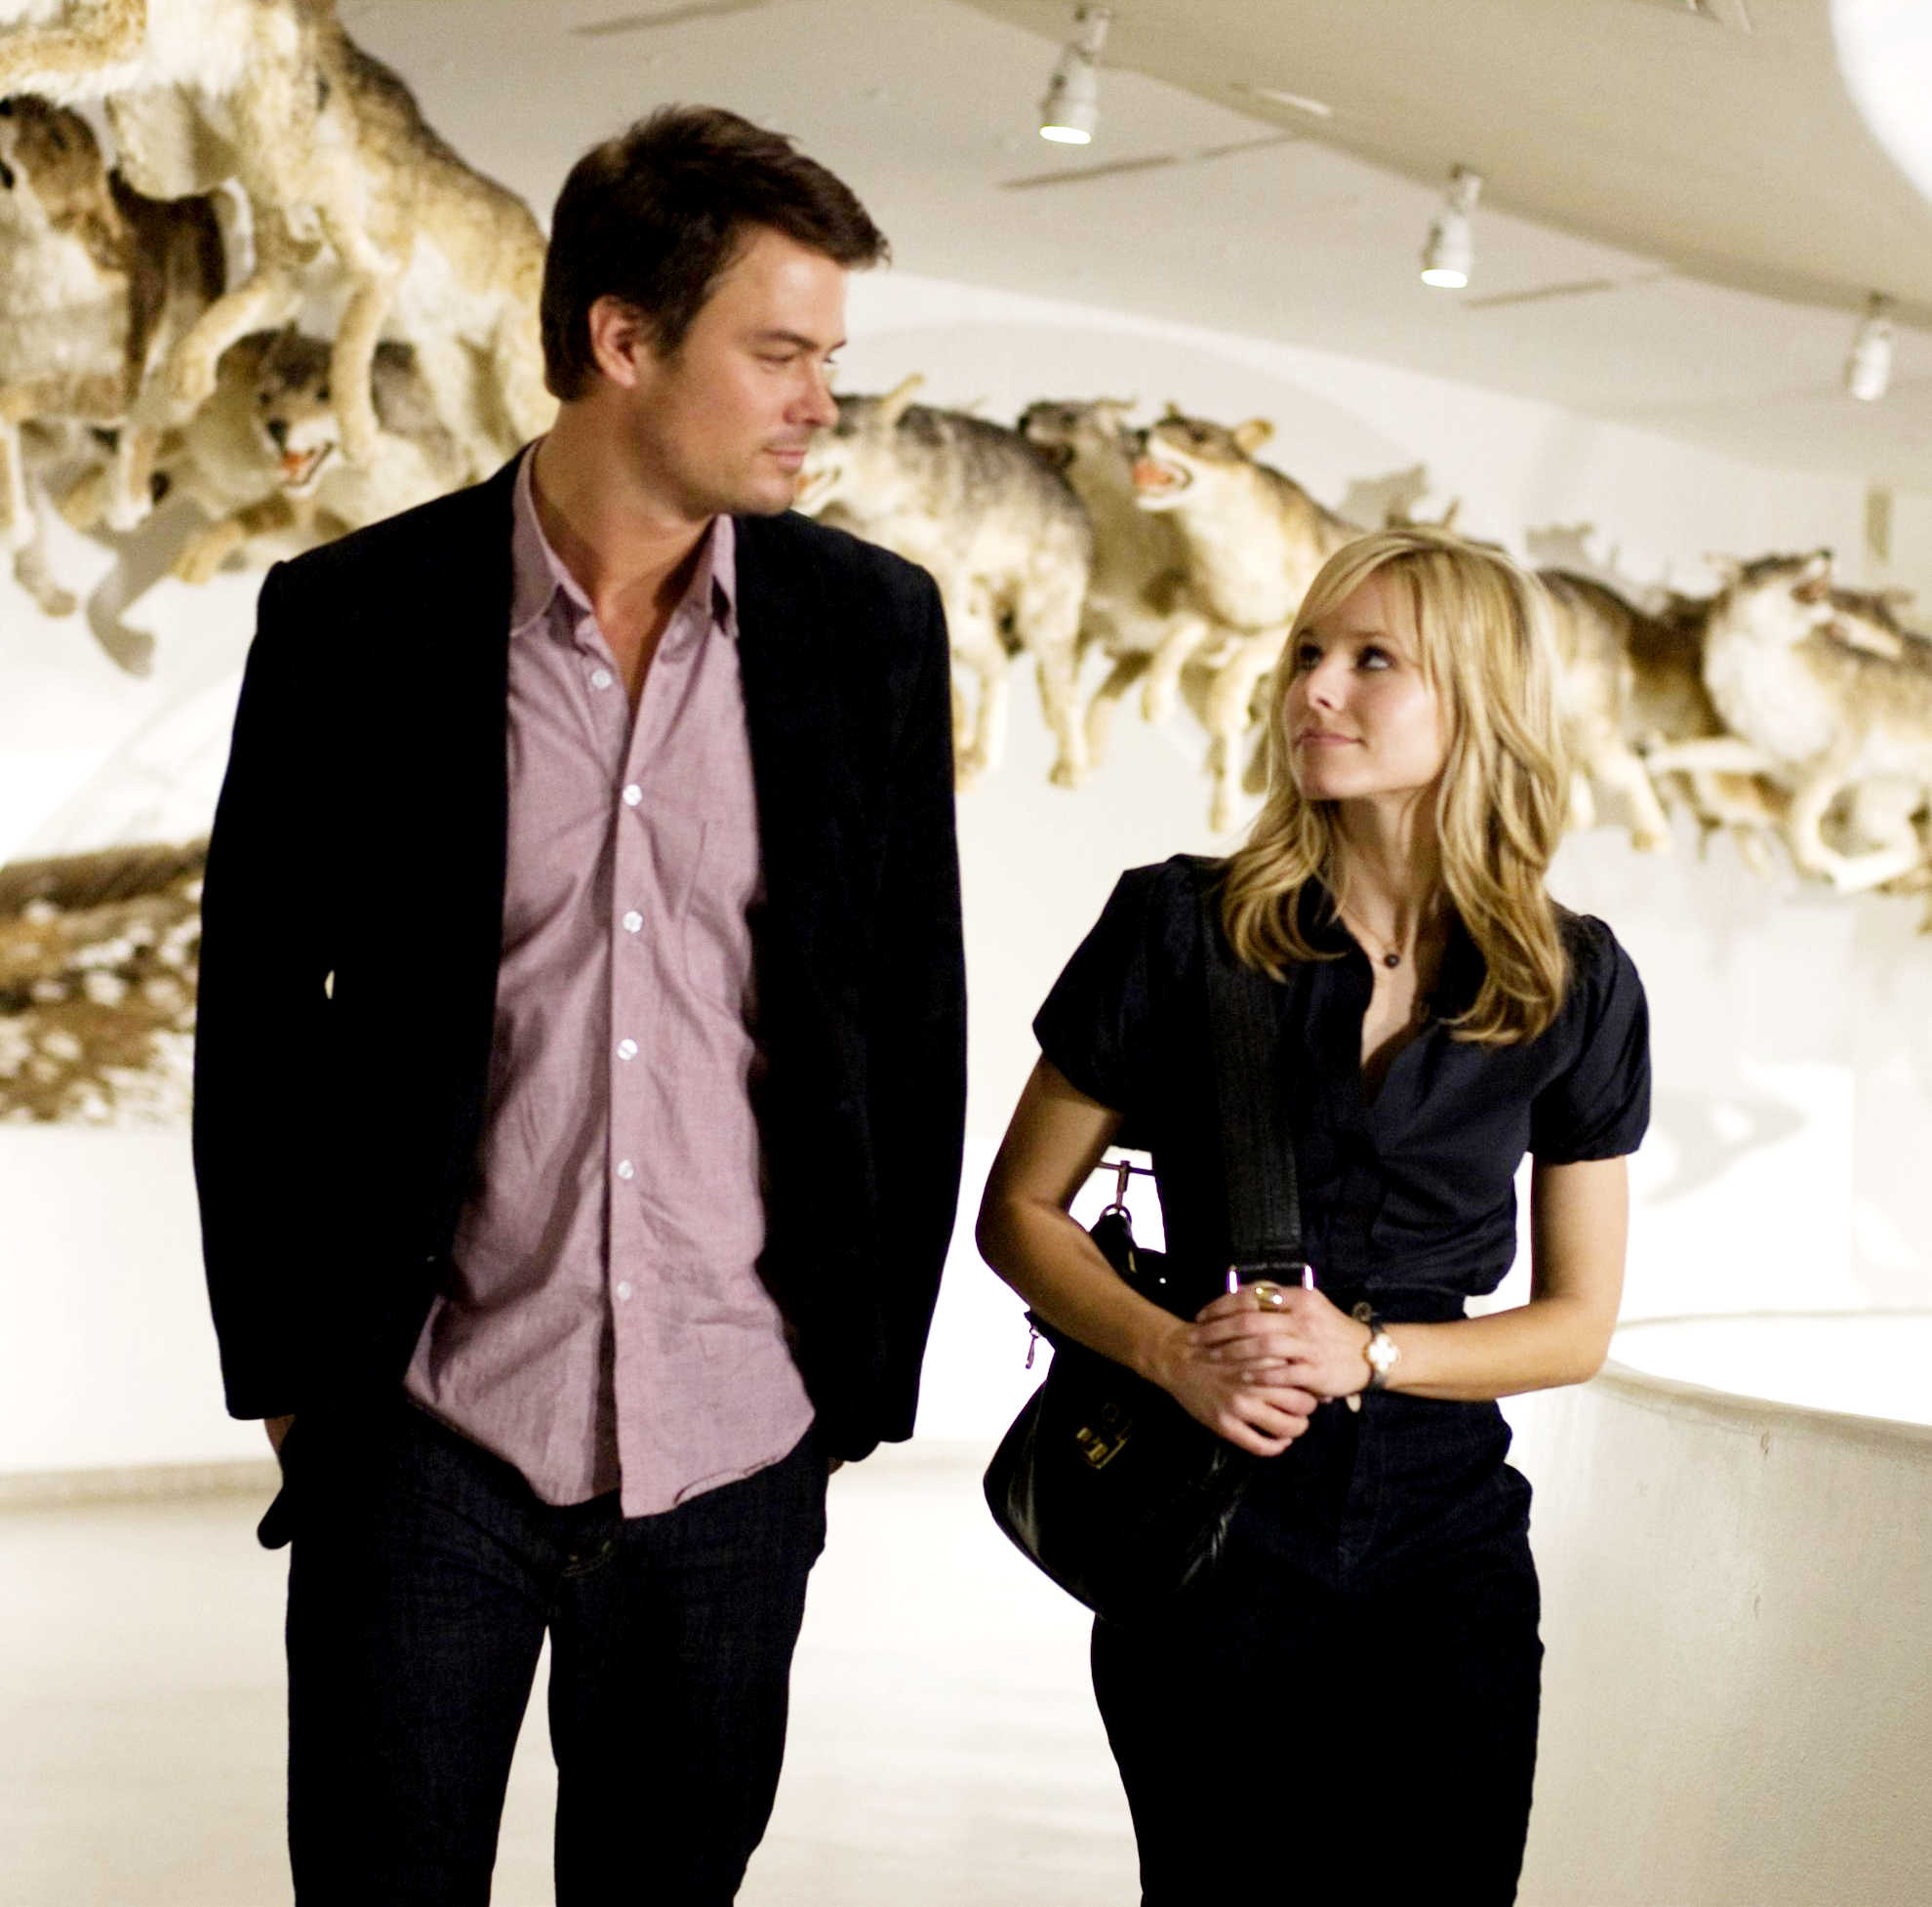 Josh Duhamel stars as Nick Beamon and Kristen Bell stars as Beth Harper in Walt Disney Pictures' When in Rome (2010). Photo credit by Myles Aronowitz.